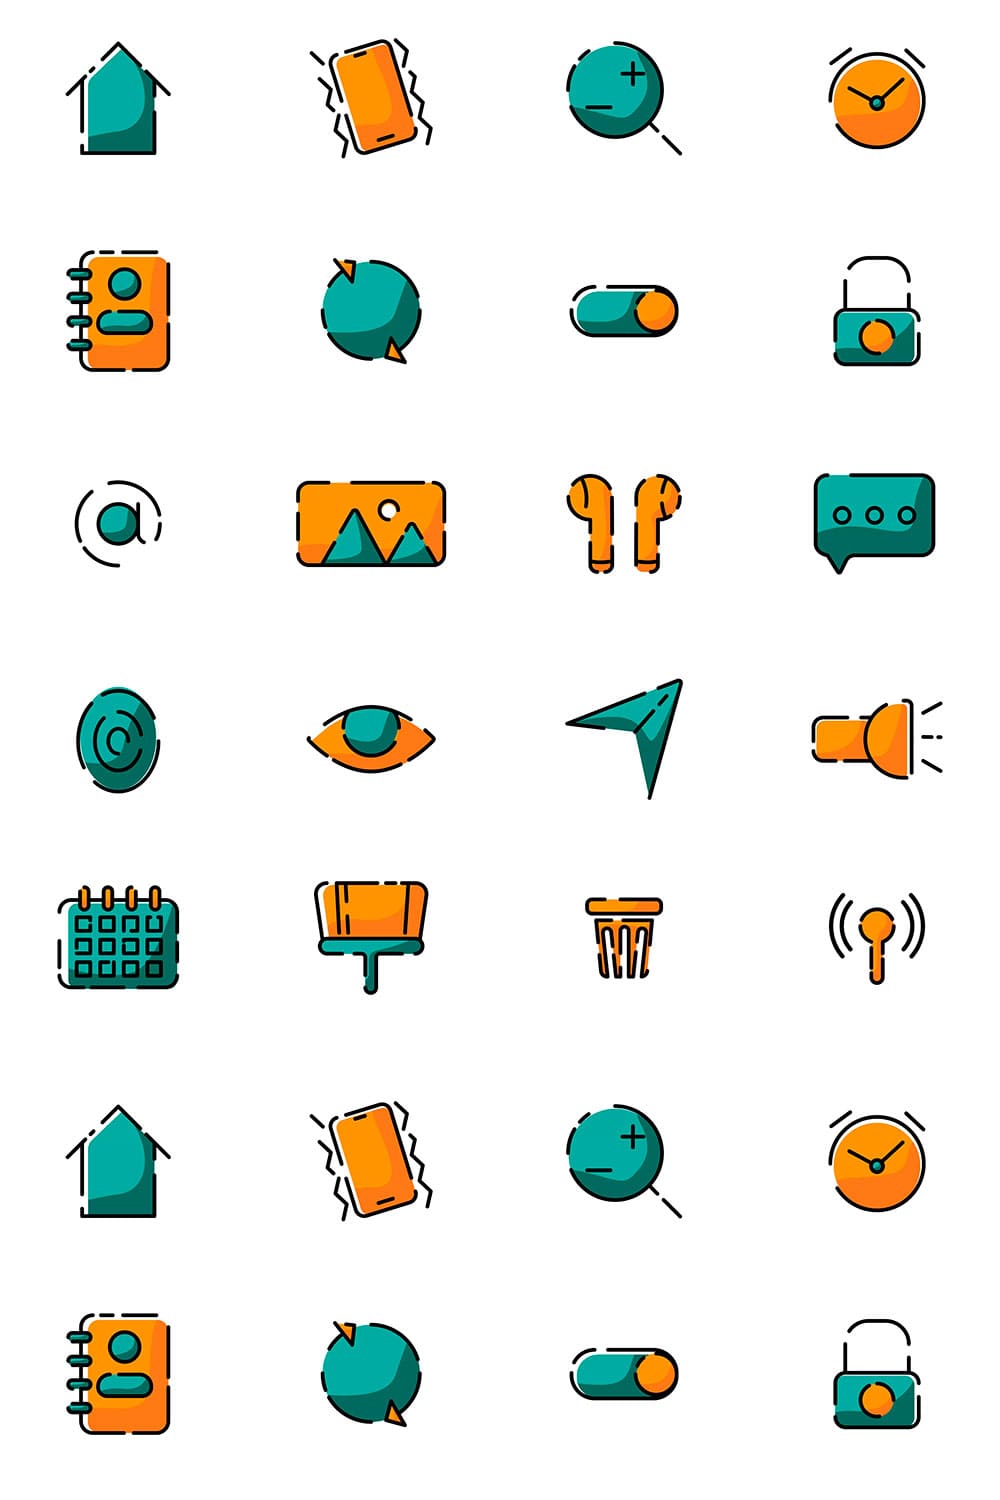 20 colored mobile icons set, picture for pinterest.